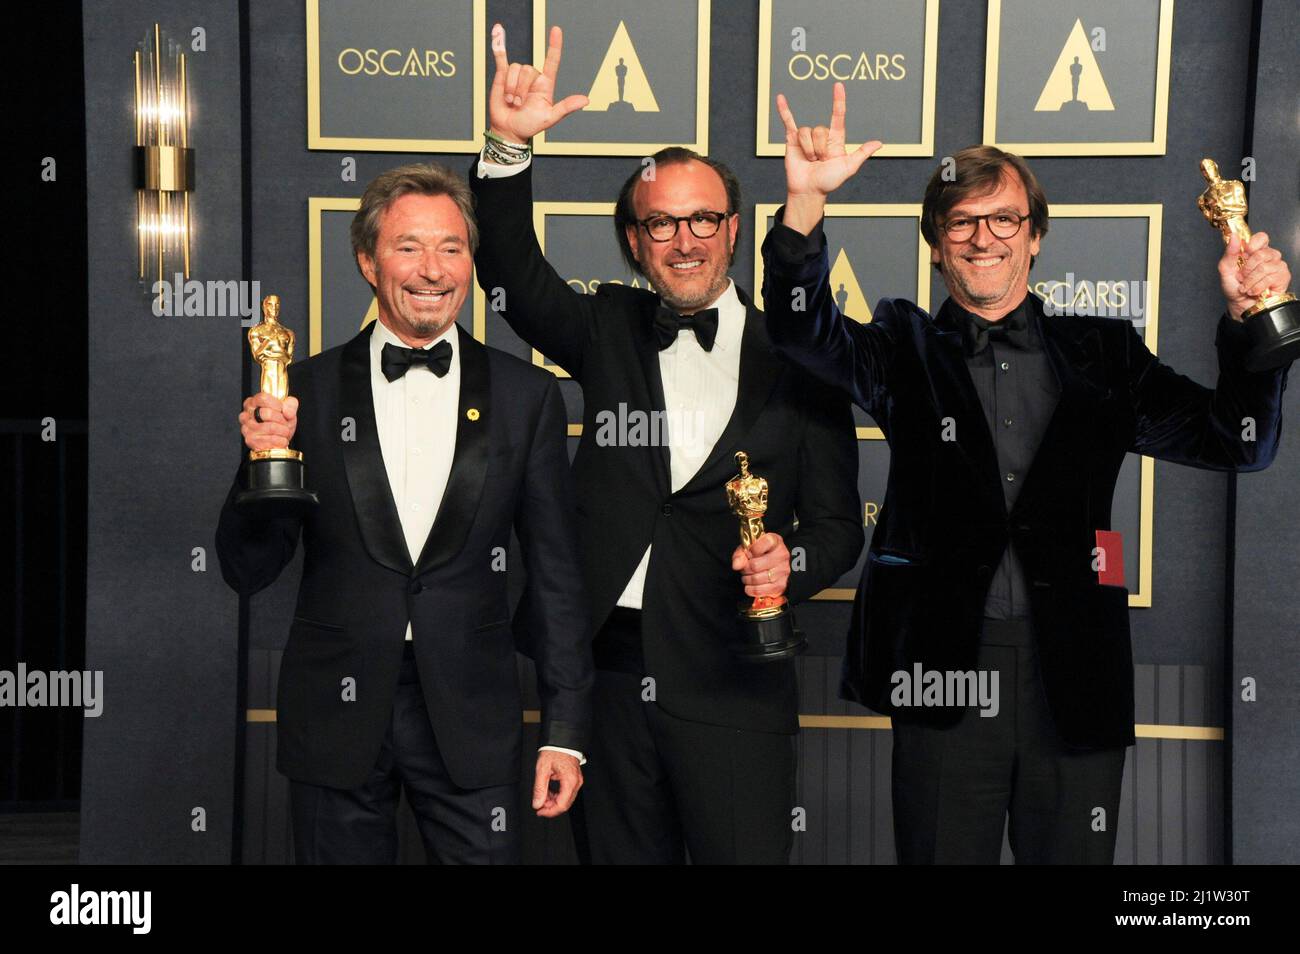 Los Angeles, CA. 27th Mar, 2022. Patrick Wachsberger, Philippe Rousselet, Fabrice Gianfermi in the press room for 94th Academy Awards - Press Room, Dolby Theatre, Los Angeles, CA March 27, 2022. Credit: Elizabeth Goodenough/Everett Collection/Alamy Live News Stock Photo